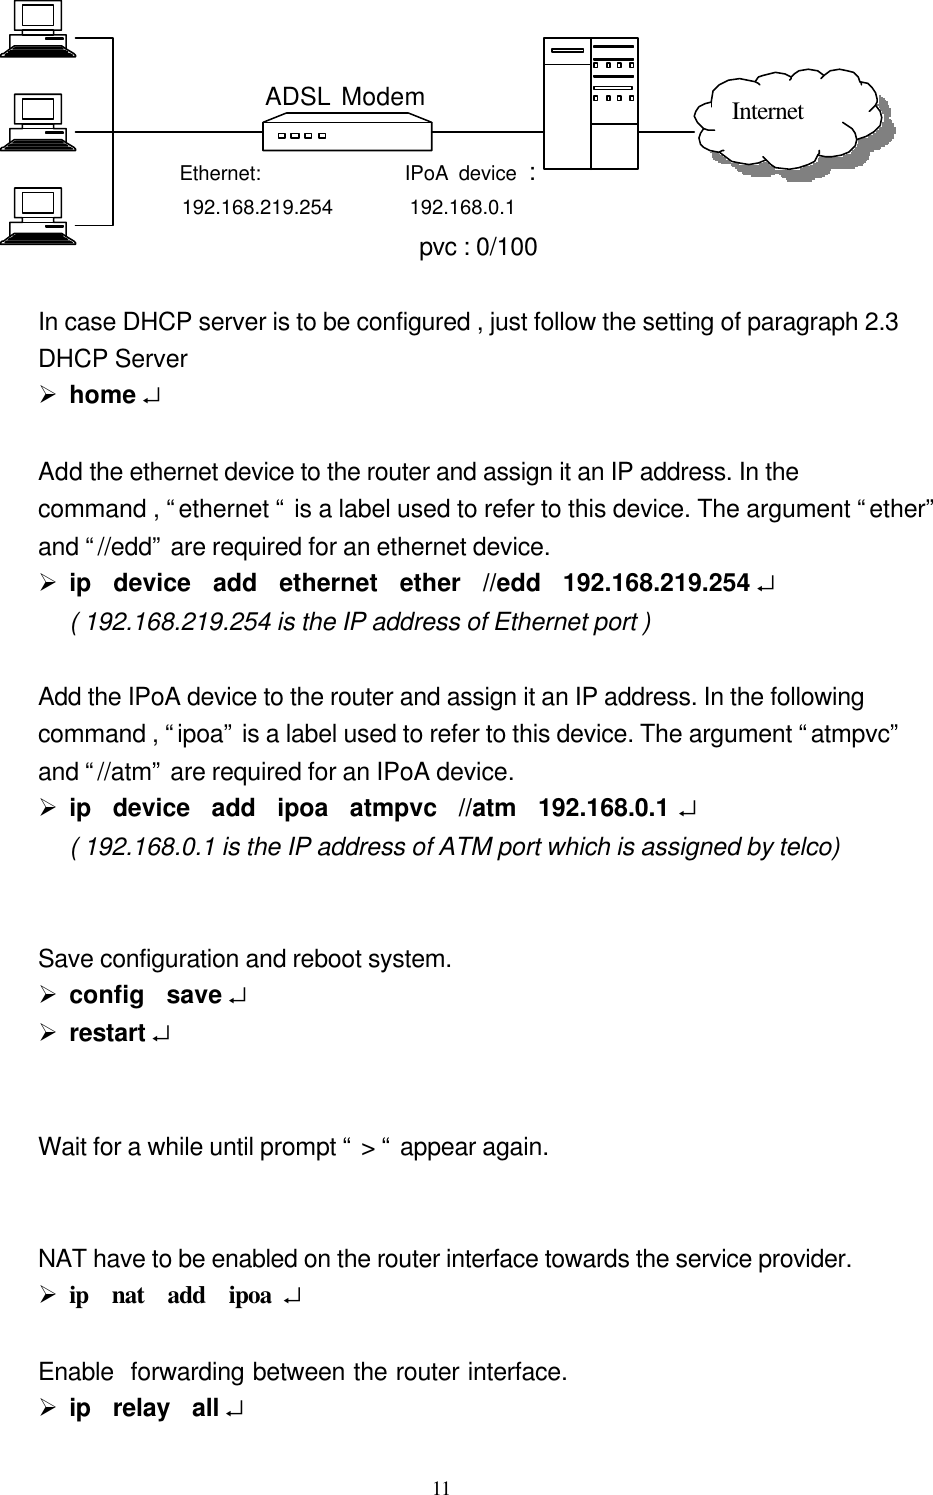  11            ADSL Modem                       Ethernet:              IPoA device :                      192.168.219.254       192.168.0.1                                       pvc : 0/100  In case DHCP server is to be configured , just follow the setting of paragraph 2.3   DHCP Server   Ø home ↵  Add the ethernet device to the router and assign it an IP address. In the   command , “ethernet “ is a label used to refer to this device. The argument “ether” and “//edd” are required for an ethernet device. Ø ip  device  add  ethernet  ether  //edd  192.168.219.254 ↵ ( 192.168.219.254 is the IP address of Ethernet port )    Add the IPoA device to the router and assign it an IP address. In the following   command , “ipoa” is a label used to refer to this device. The argument “atmpvc”   and “//atm” are required for an IPoA device. Ø ip  device  add  ipoa  atmpvc  //atm  192.168.0.1 ↵ ( 192.168.0.1 is the IP address of ATM port which is assigned by telco)   Save configuration and reboot system. Ø config  save ↵ Ø restart ↵   Wait for a while until prompt “ &gt; “ appear again.                       NAT have to be enabled on the router interface towards the service provider. Ø ip  nat  add  ipoa ↵    Enable  forwarding between the router interface. Ø ip  relay  all ↵ Internet 